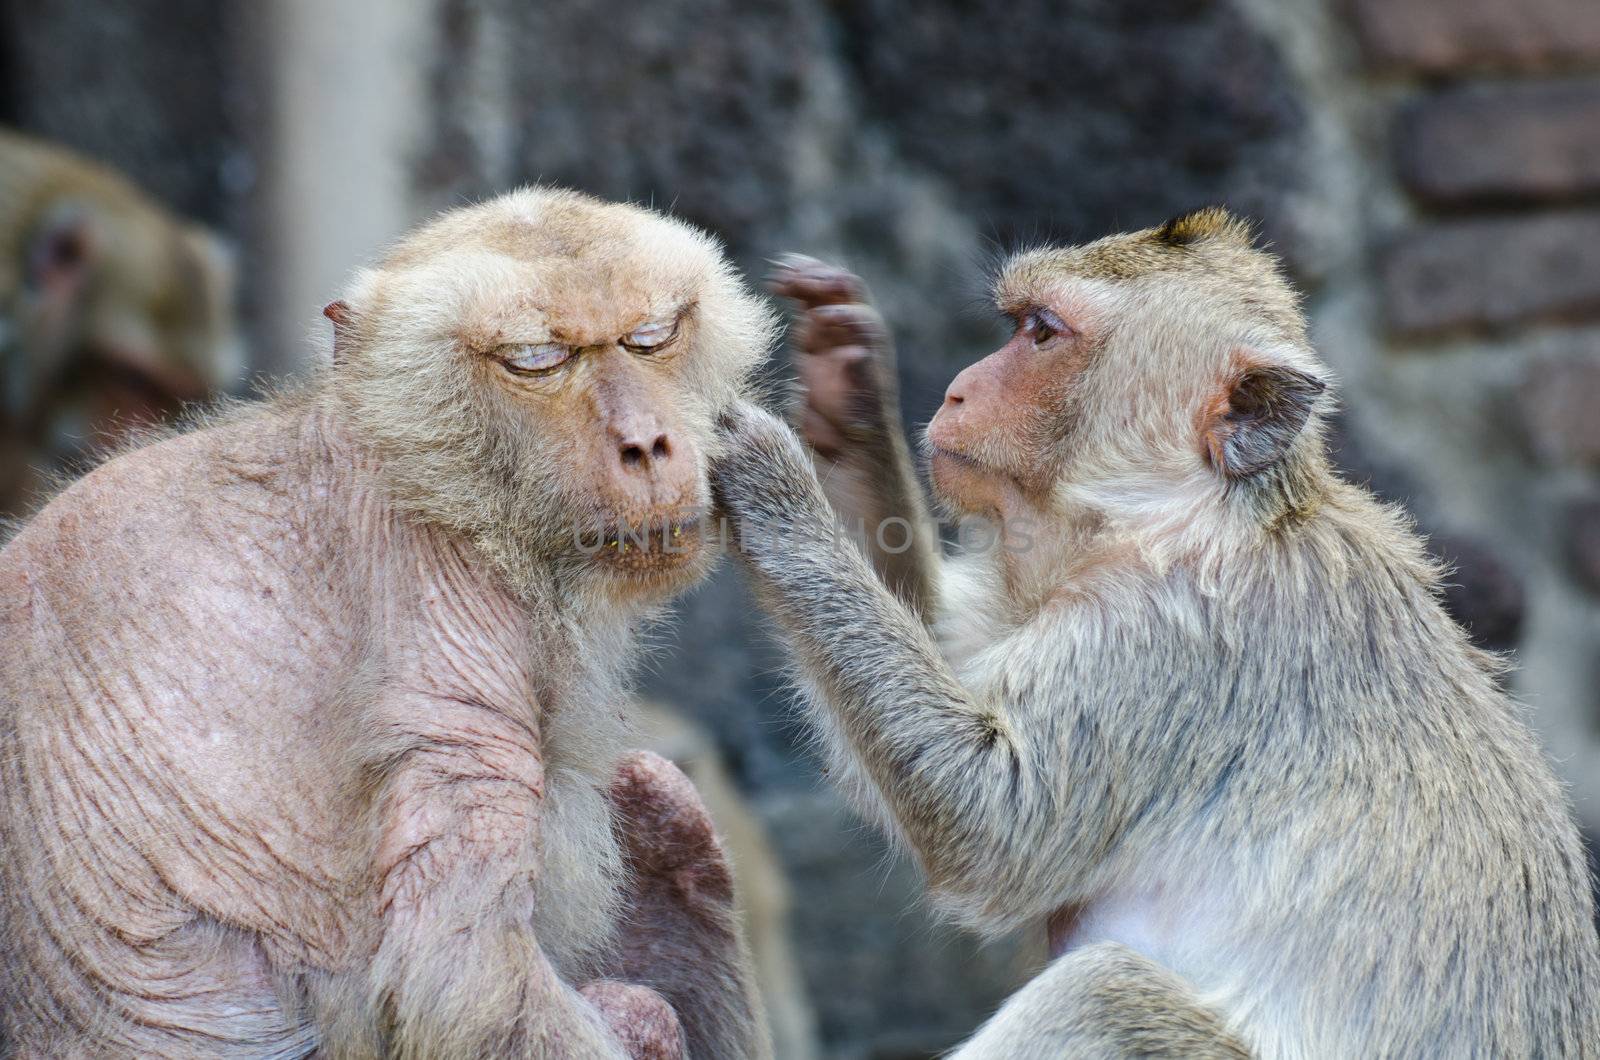 Macaque are husband and wife care